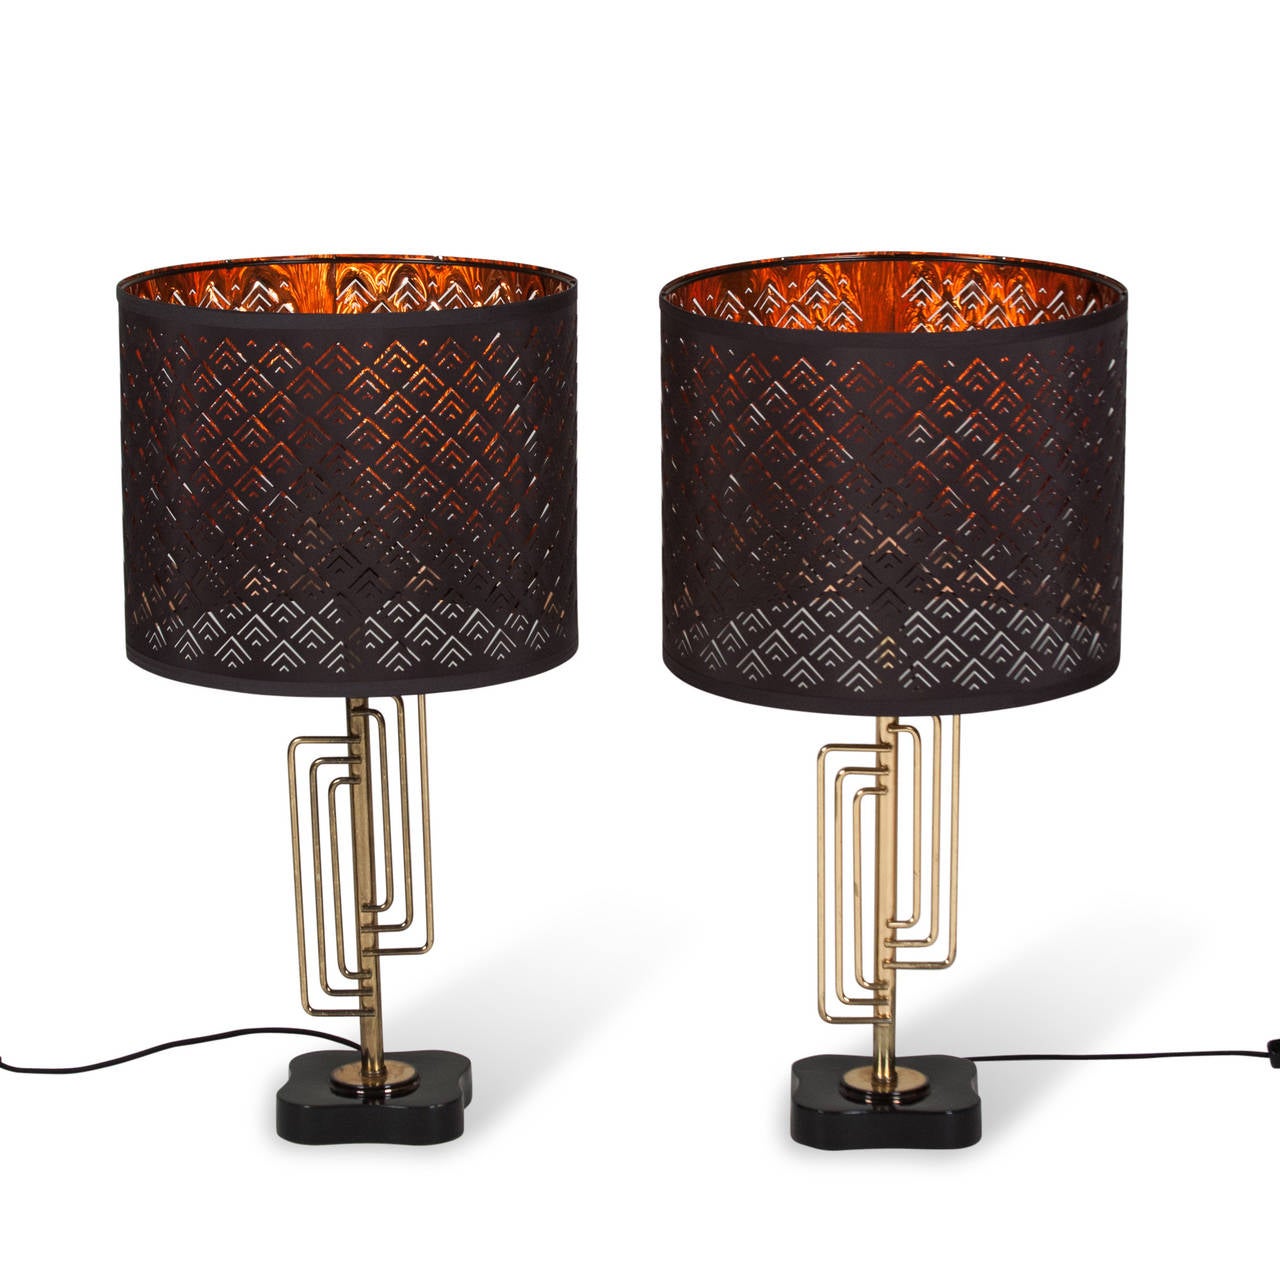 Pair of bent brass rod table lamps, the rods in a concentric geometric shape, post mounted with a black metal base, in black perforated shades with reflective metallic lining, American circa 1960. Overall height 28 in, base measures 6 in across at